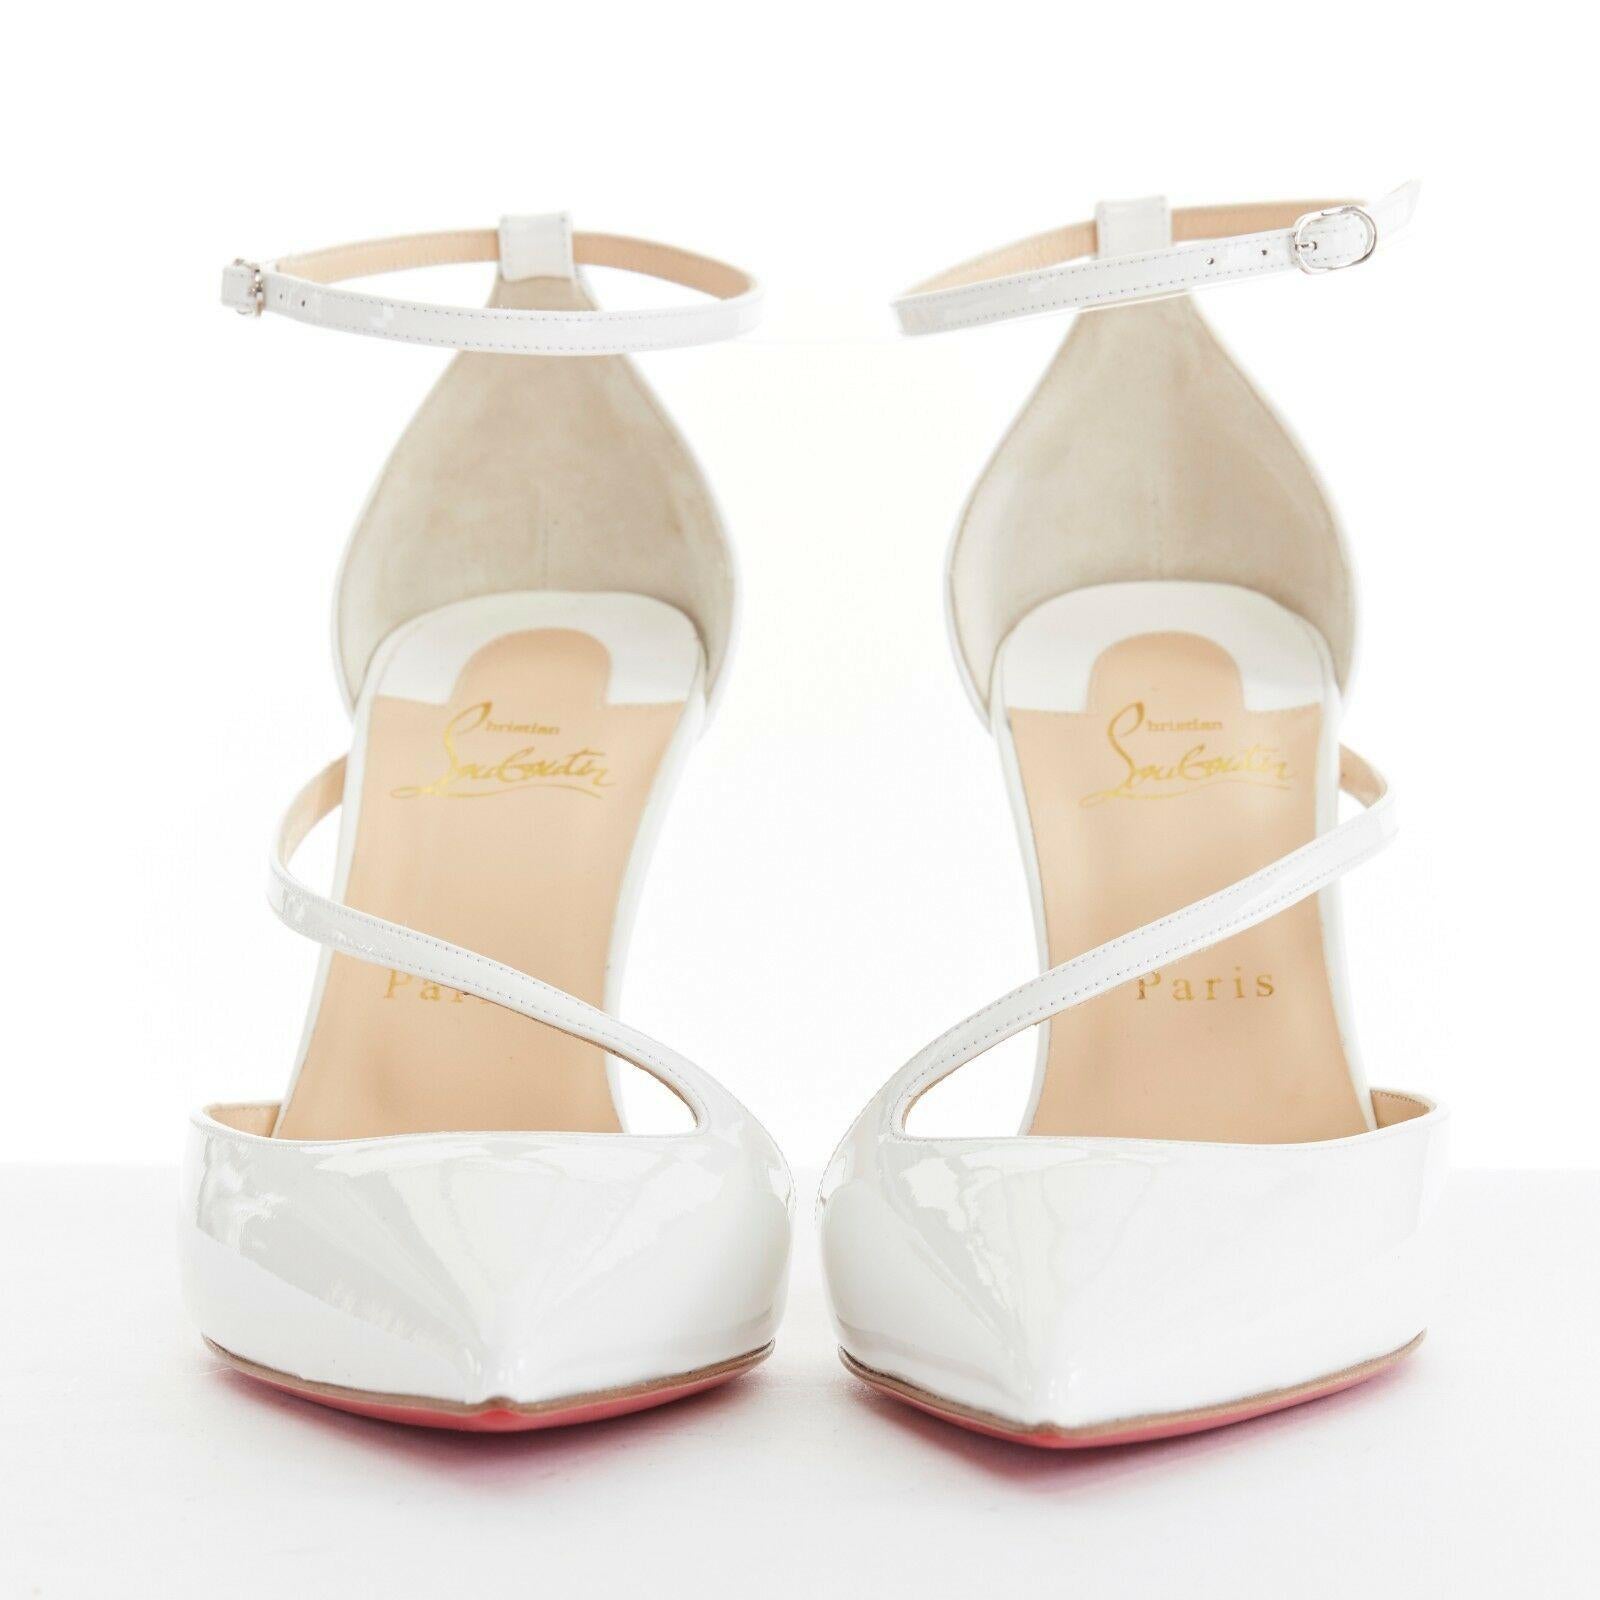 new CHRISTIAN LOUBOUTIN Fliketta 85 white patent cross strap dorsay pump EU38.5
CHRISTIAN LOUBOUTIN
Fliketta 85. White patent leather. 
Dorsay silhouette. Cross over strap at vamp. 
overed heel. Ankle strap. Silver-tone metal buckle. 
Pointed toe.